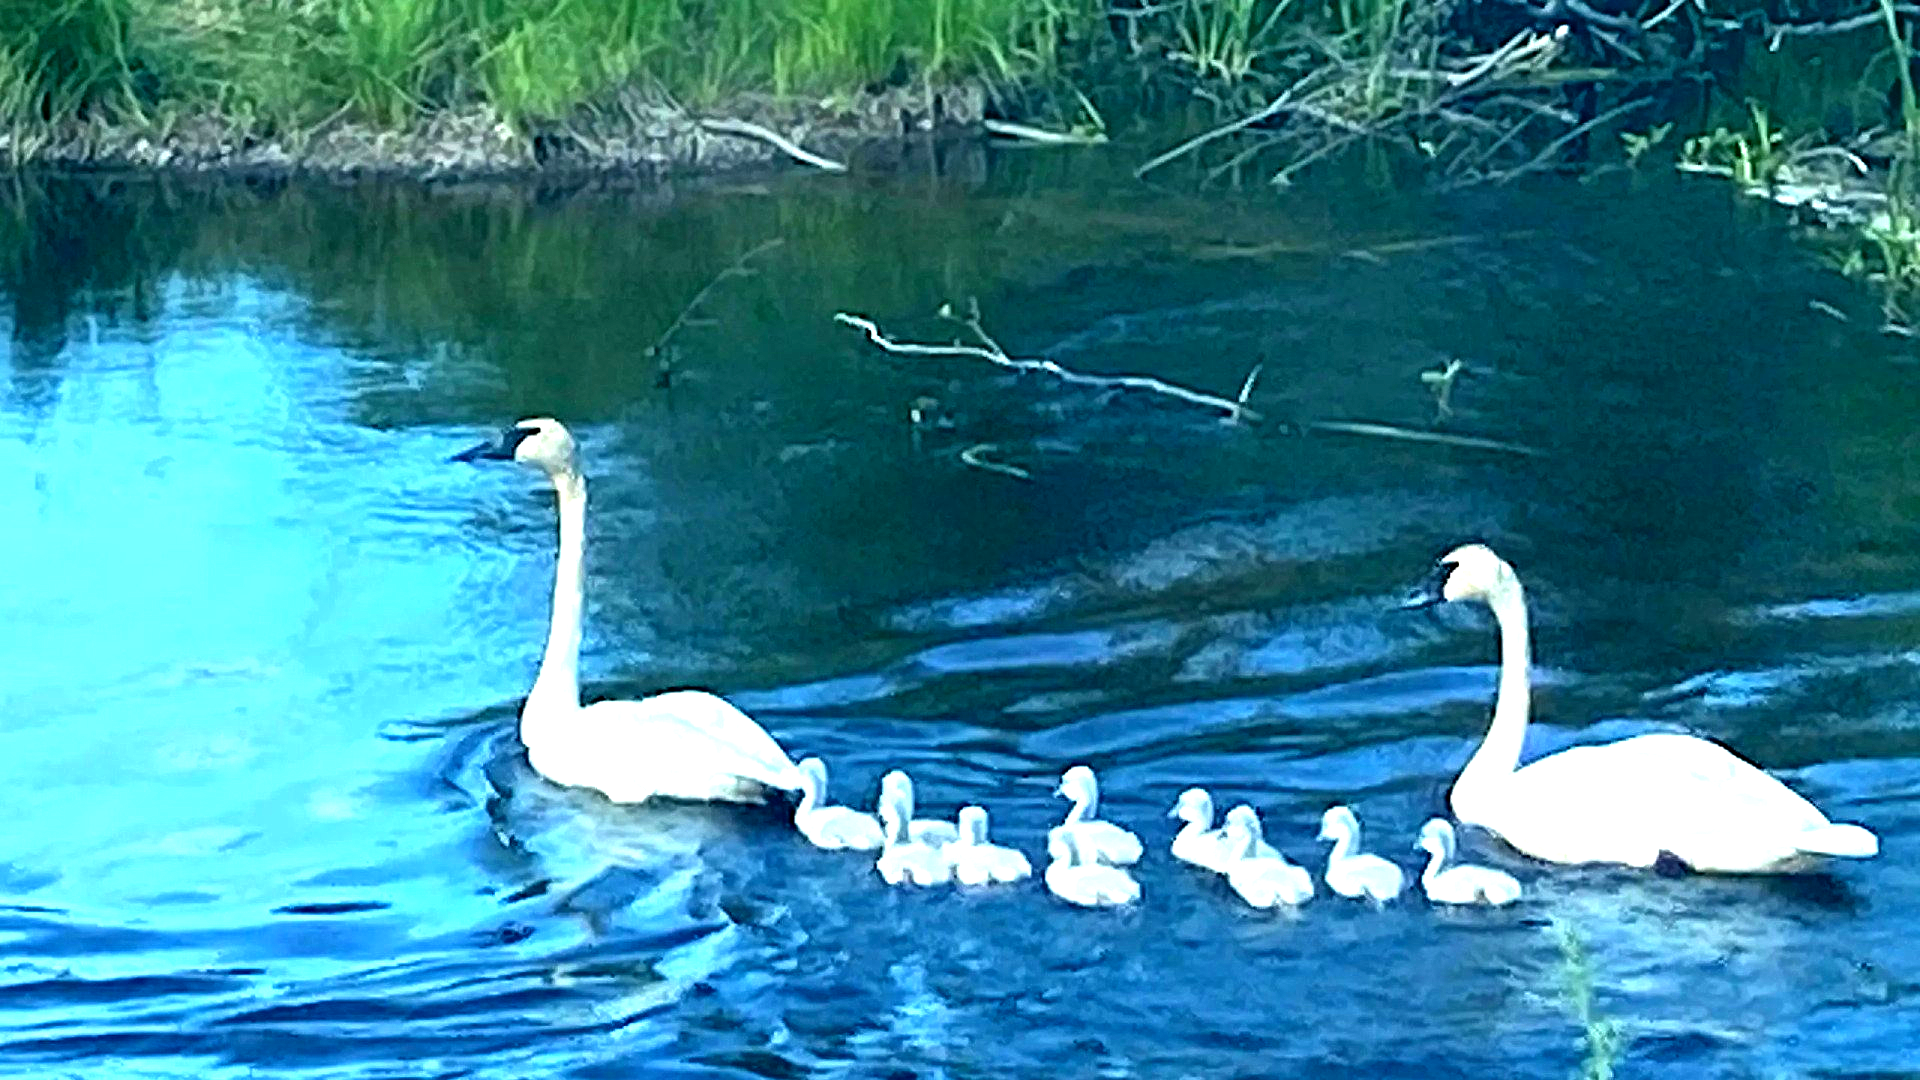 Largest trumpeter swan family: Minong swan family sets world record